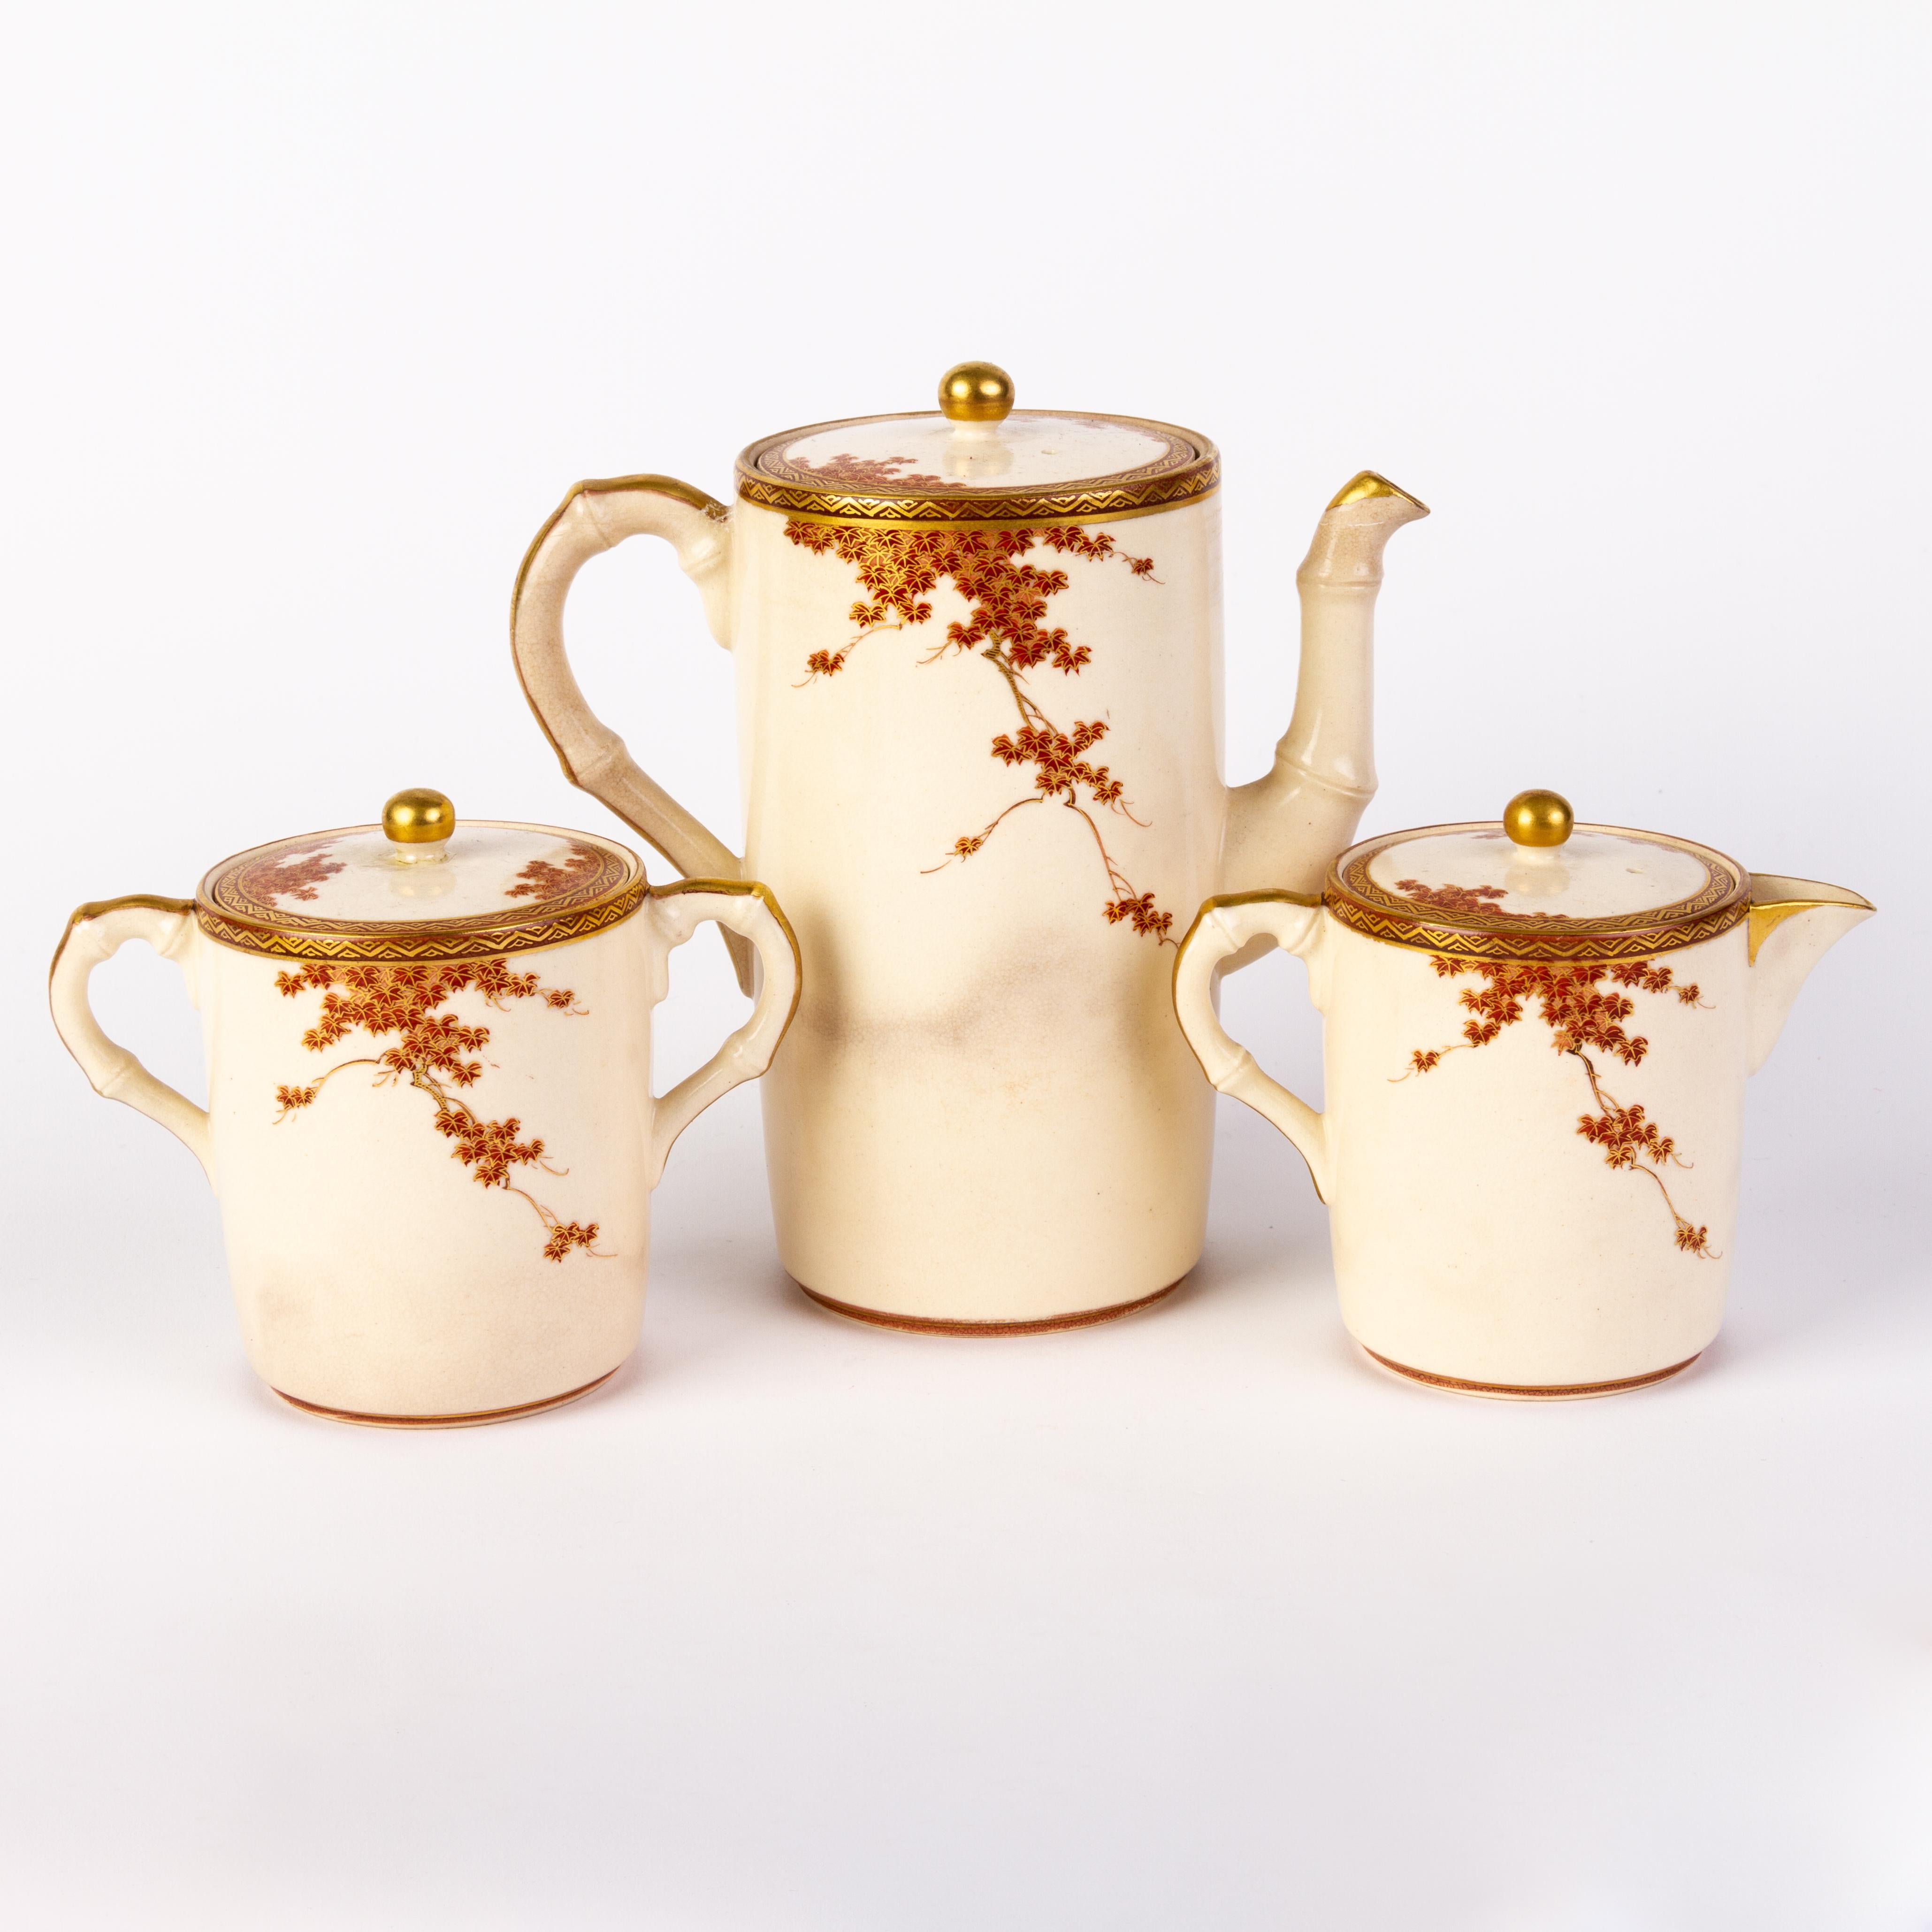 Japanese Satsuma Pottery Blossoms Painted Bamboo Shaped Coffee Set Marked Meiji
Very good condition.
From a private collection.
Free international shipping.